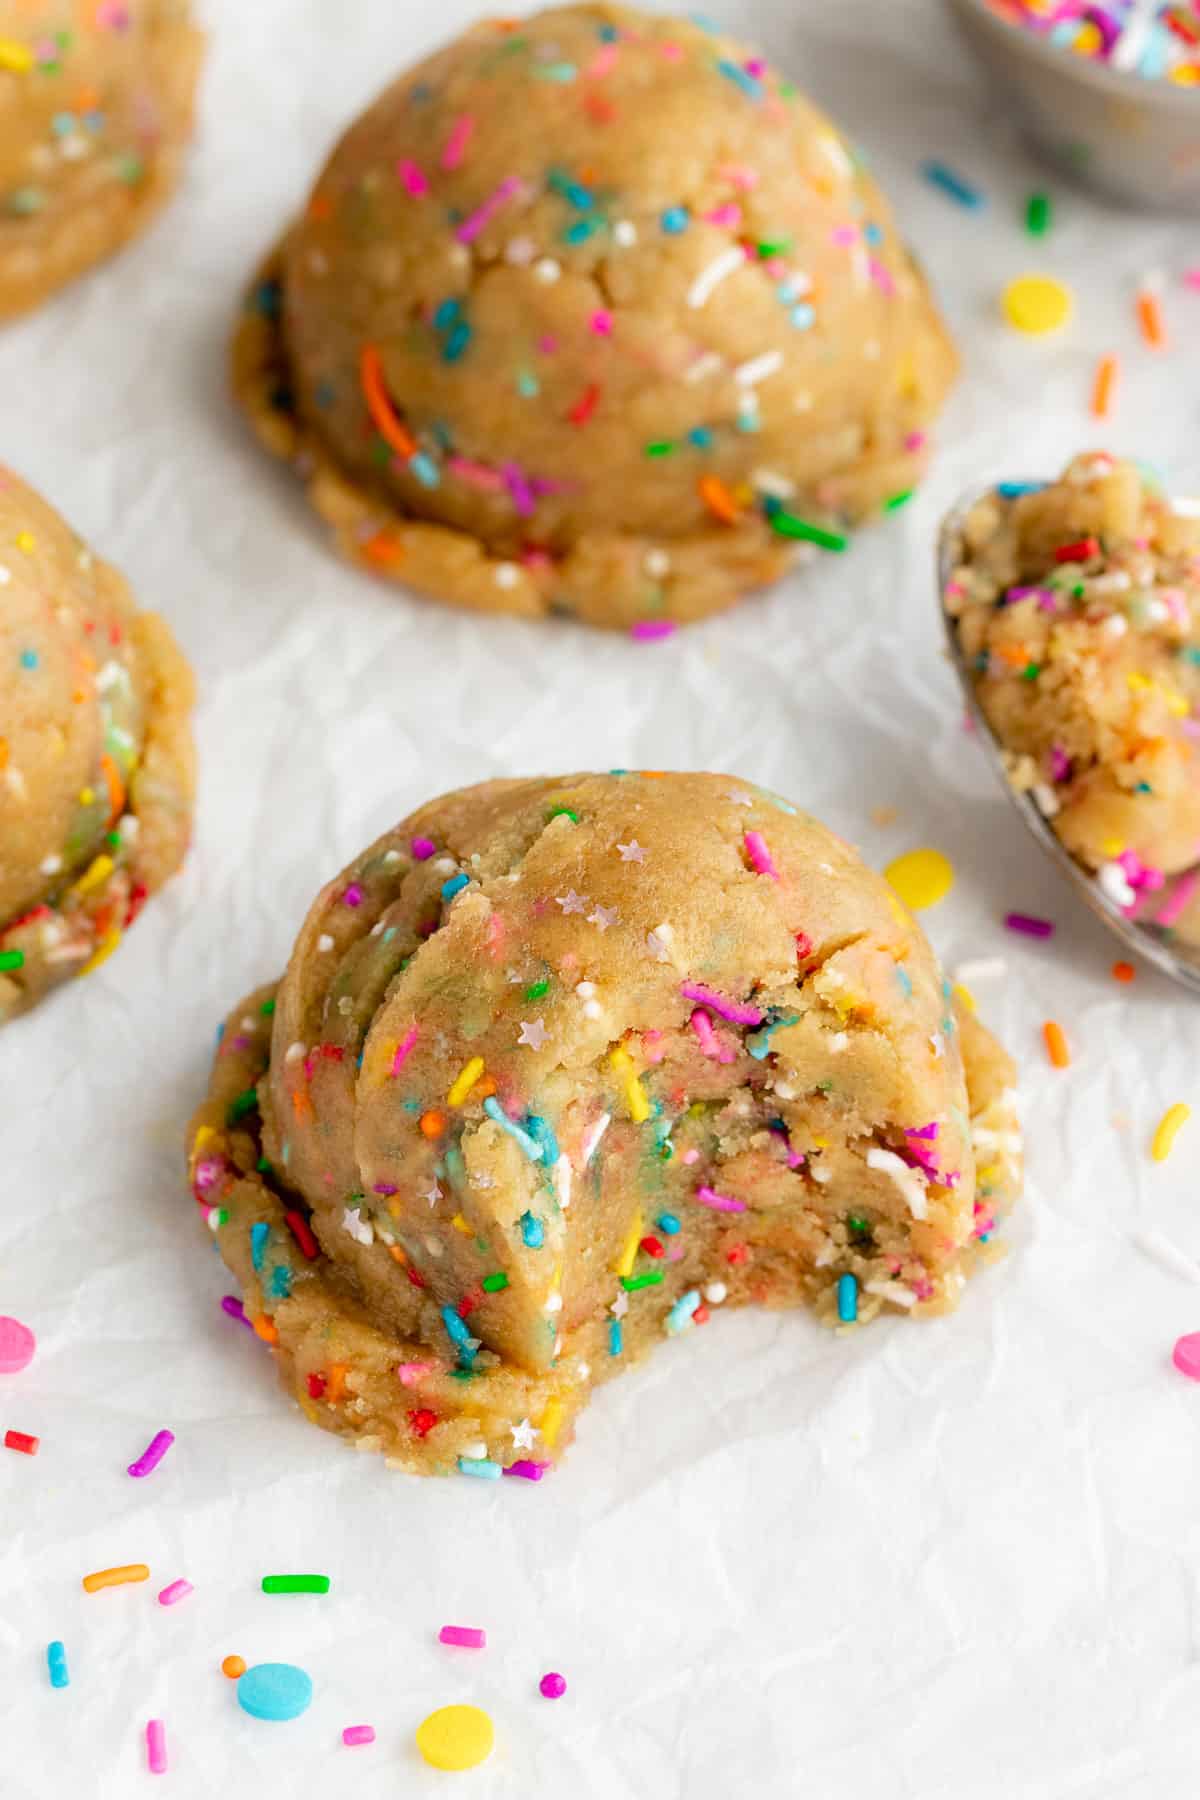 scoops of edible funfetti cookie dough with a bite taken out of the center